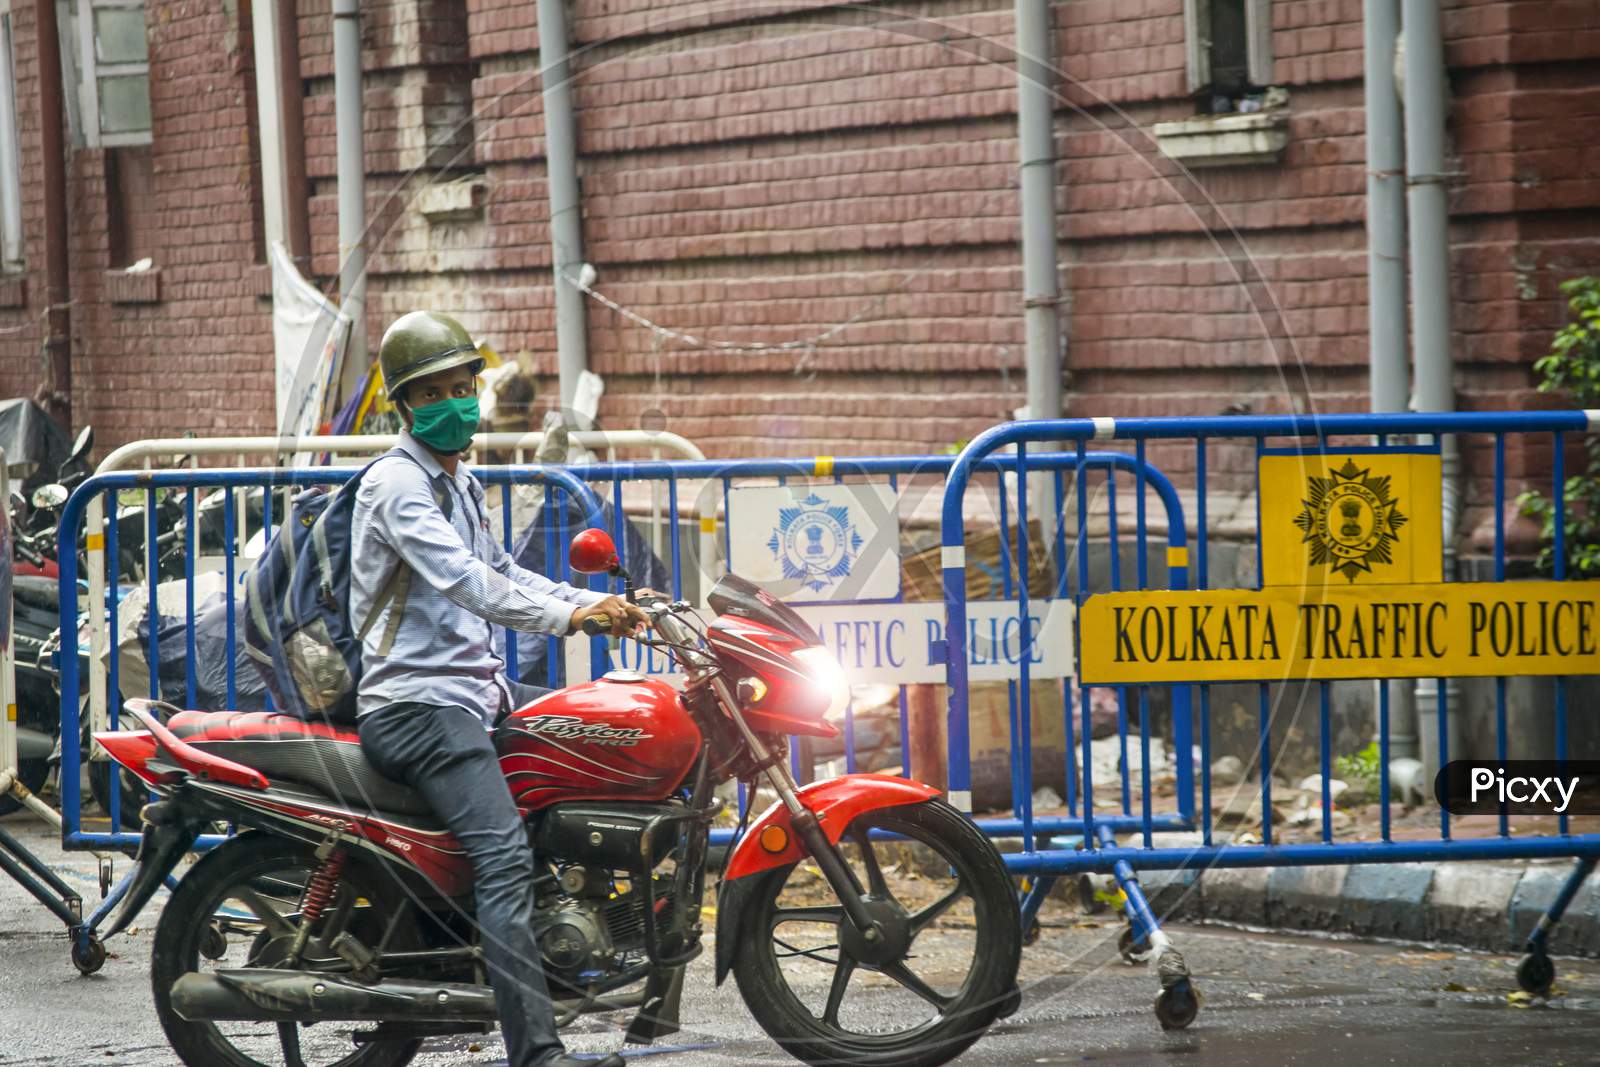 A Police person riding on a bike  while raining in kolkata near Lalbazar Police Headquarters on 21st June 2020 at Kolkata, West Bengal, India